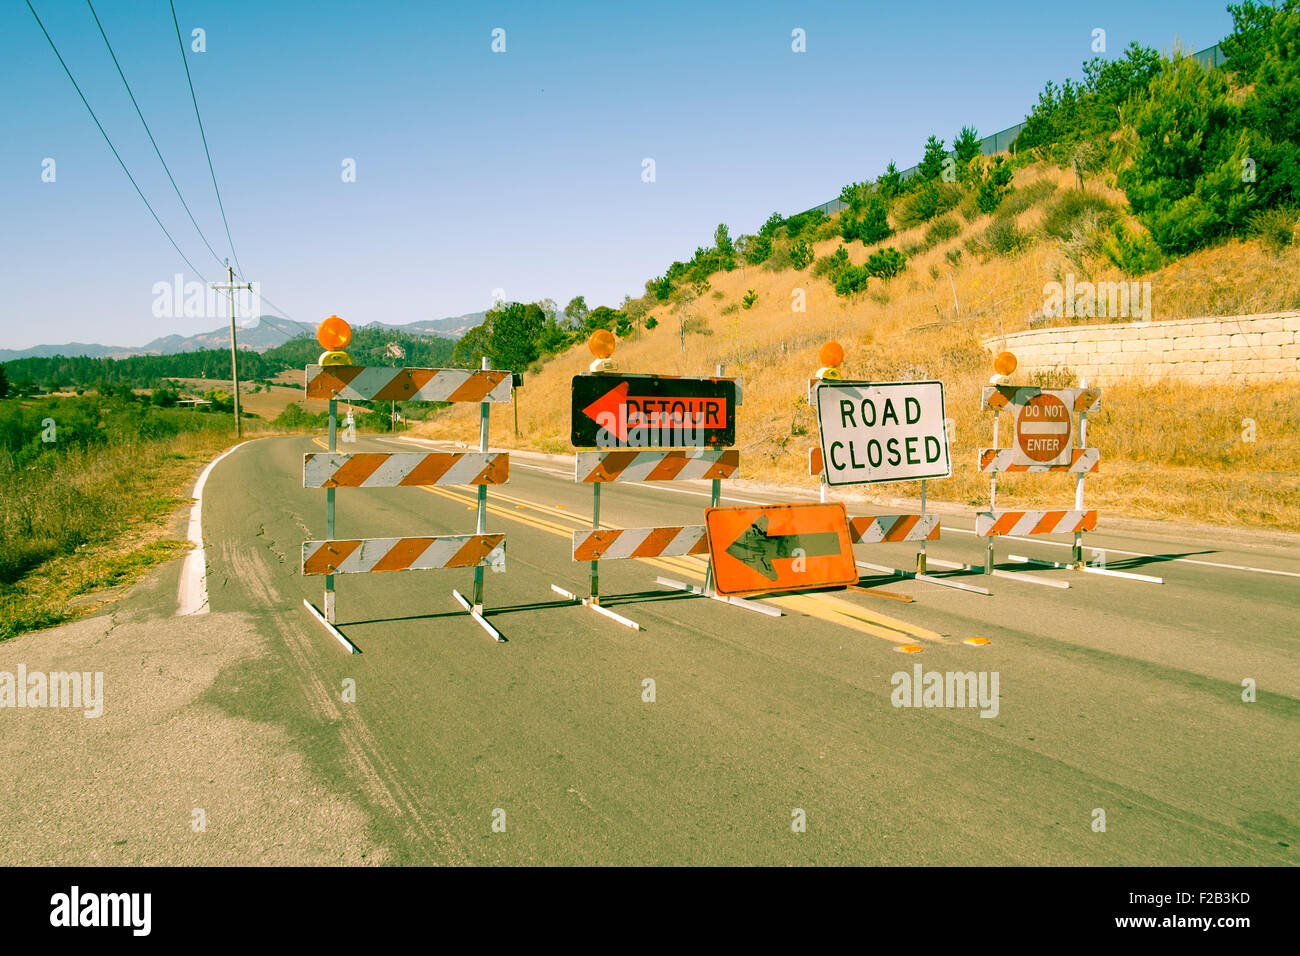 Road closed and detour signs across road in California Stock Photo